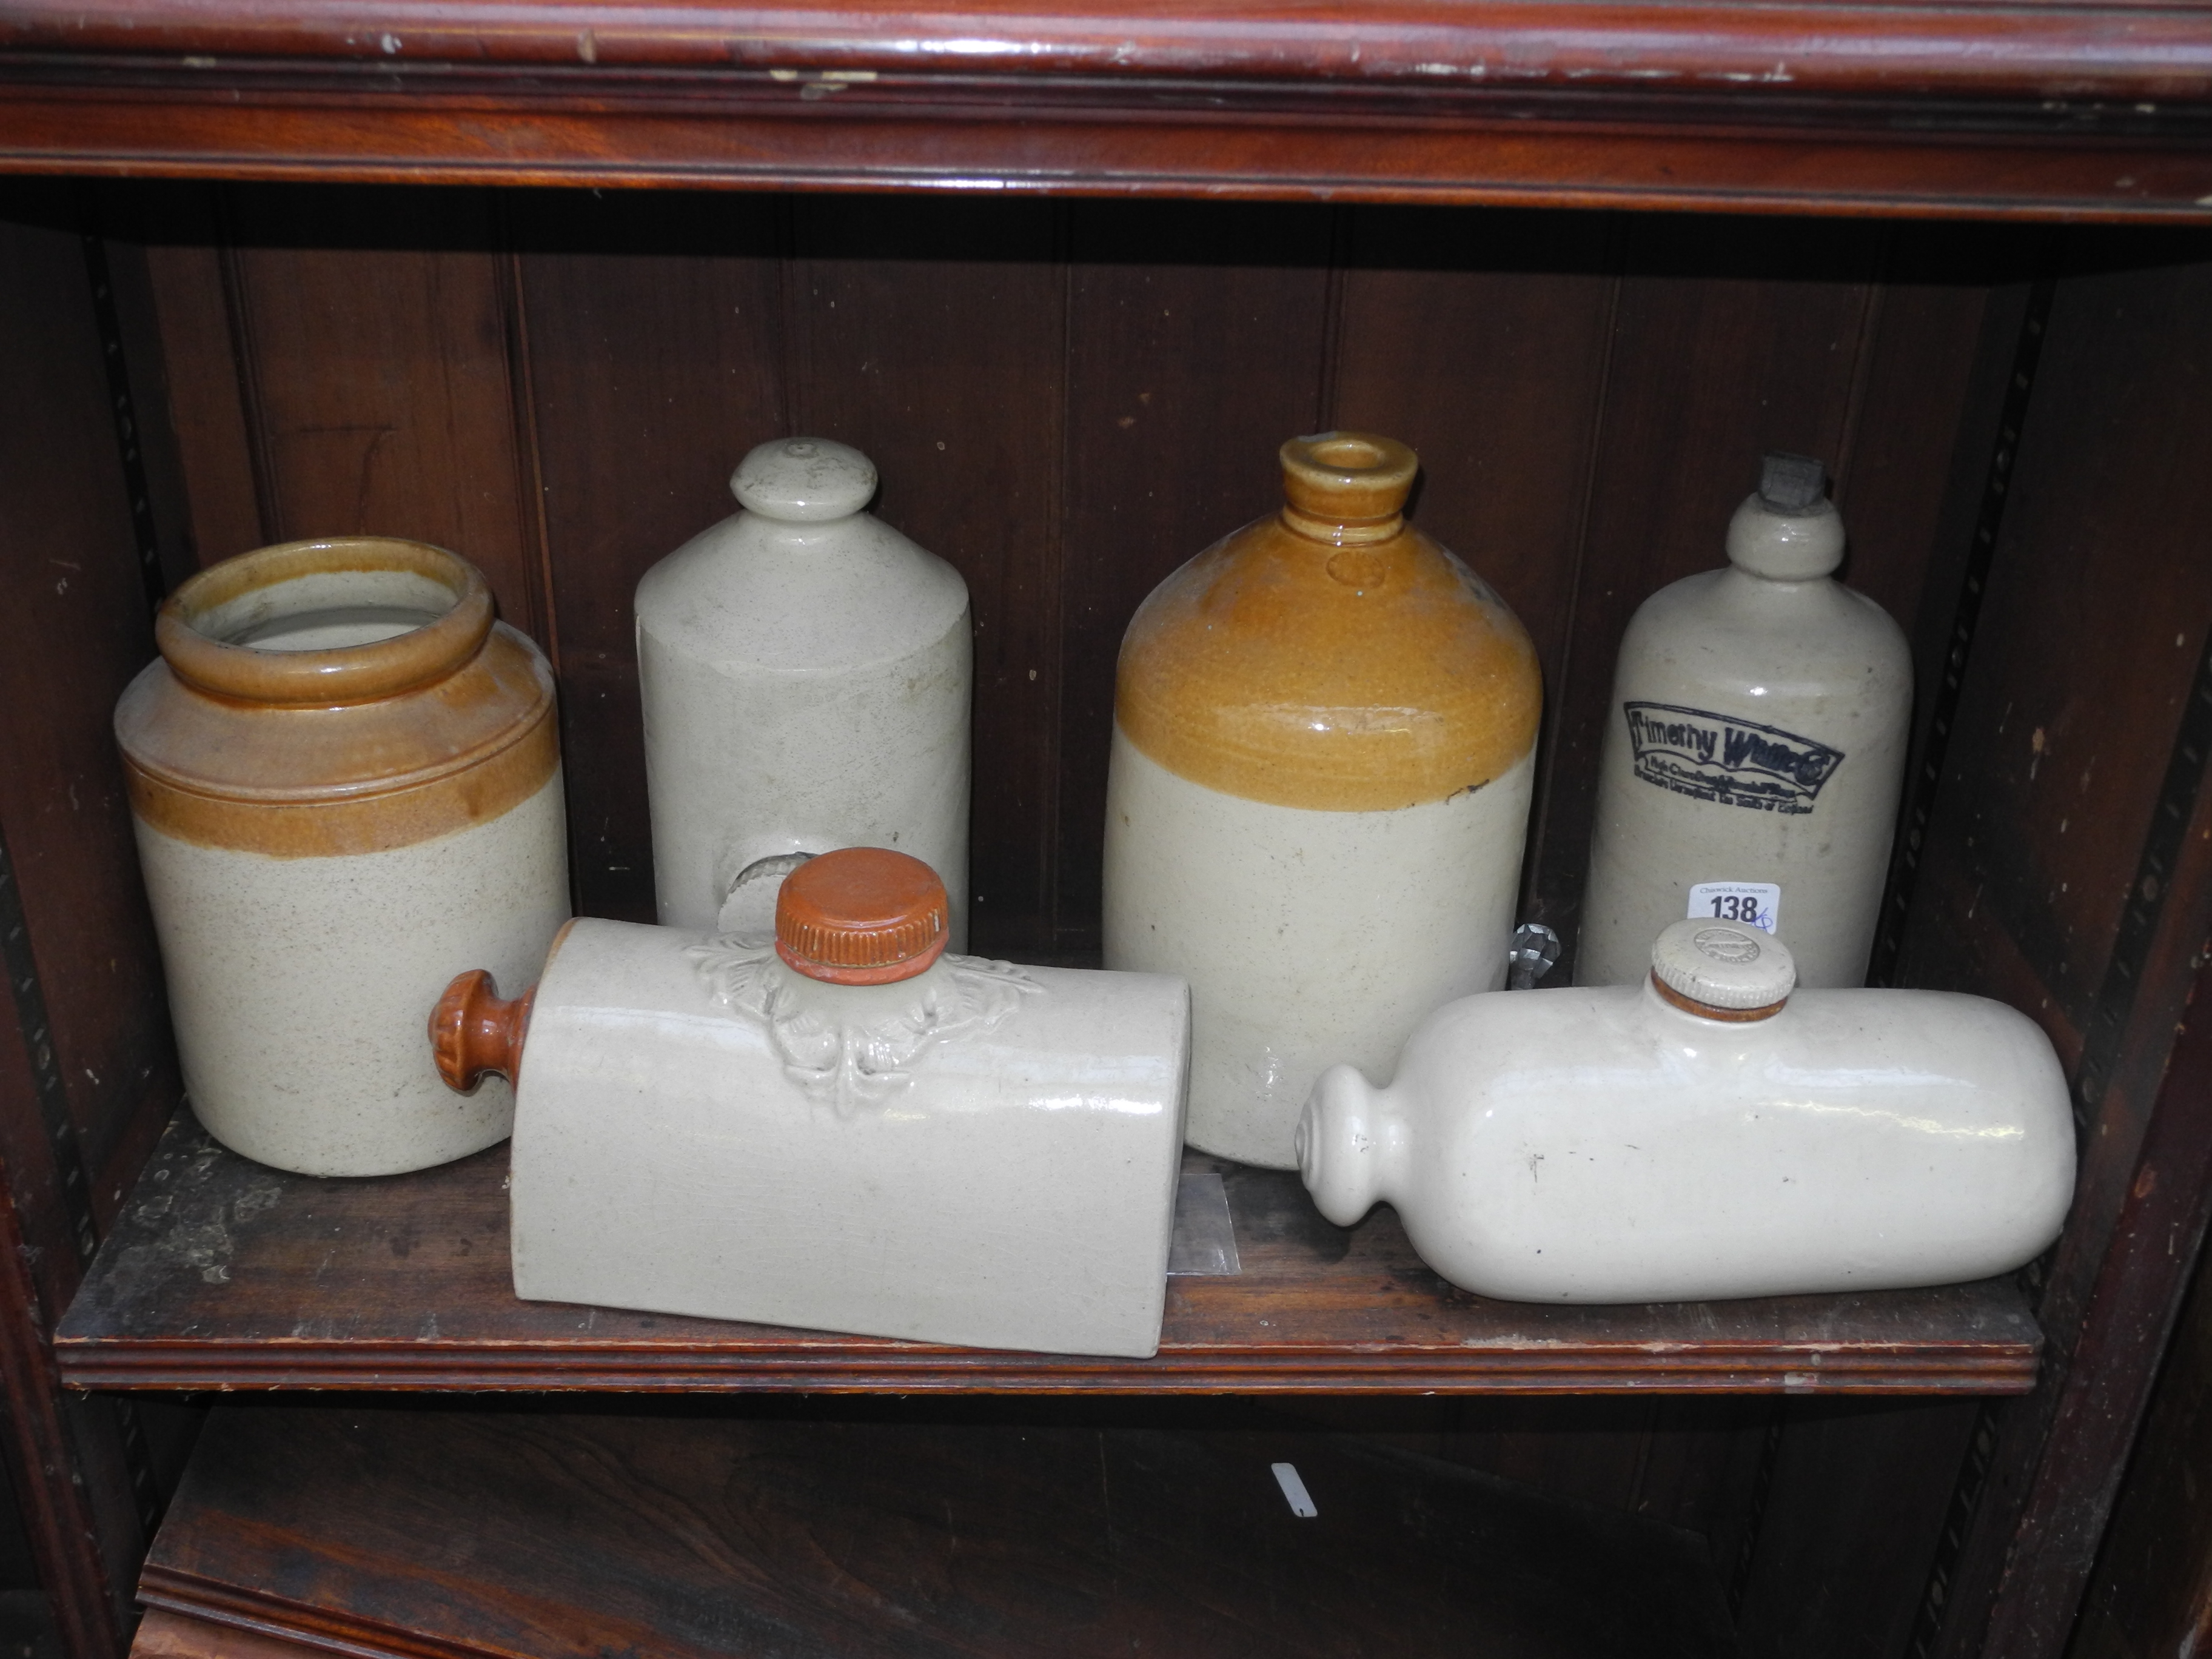 A quantity of early glass bottles and stoneware jars and bottles, including many with trade